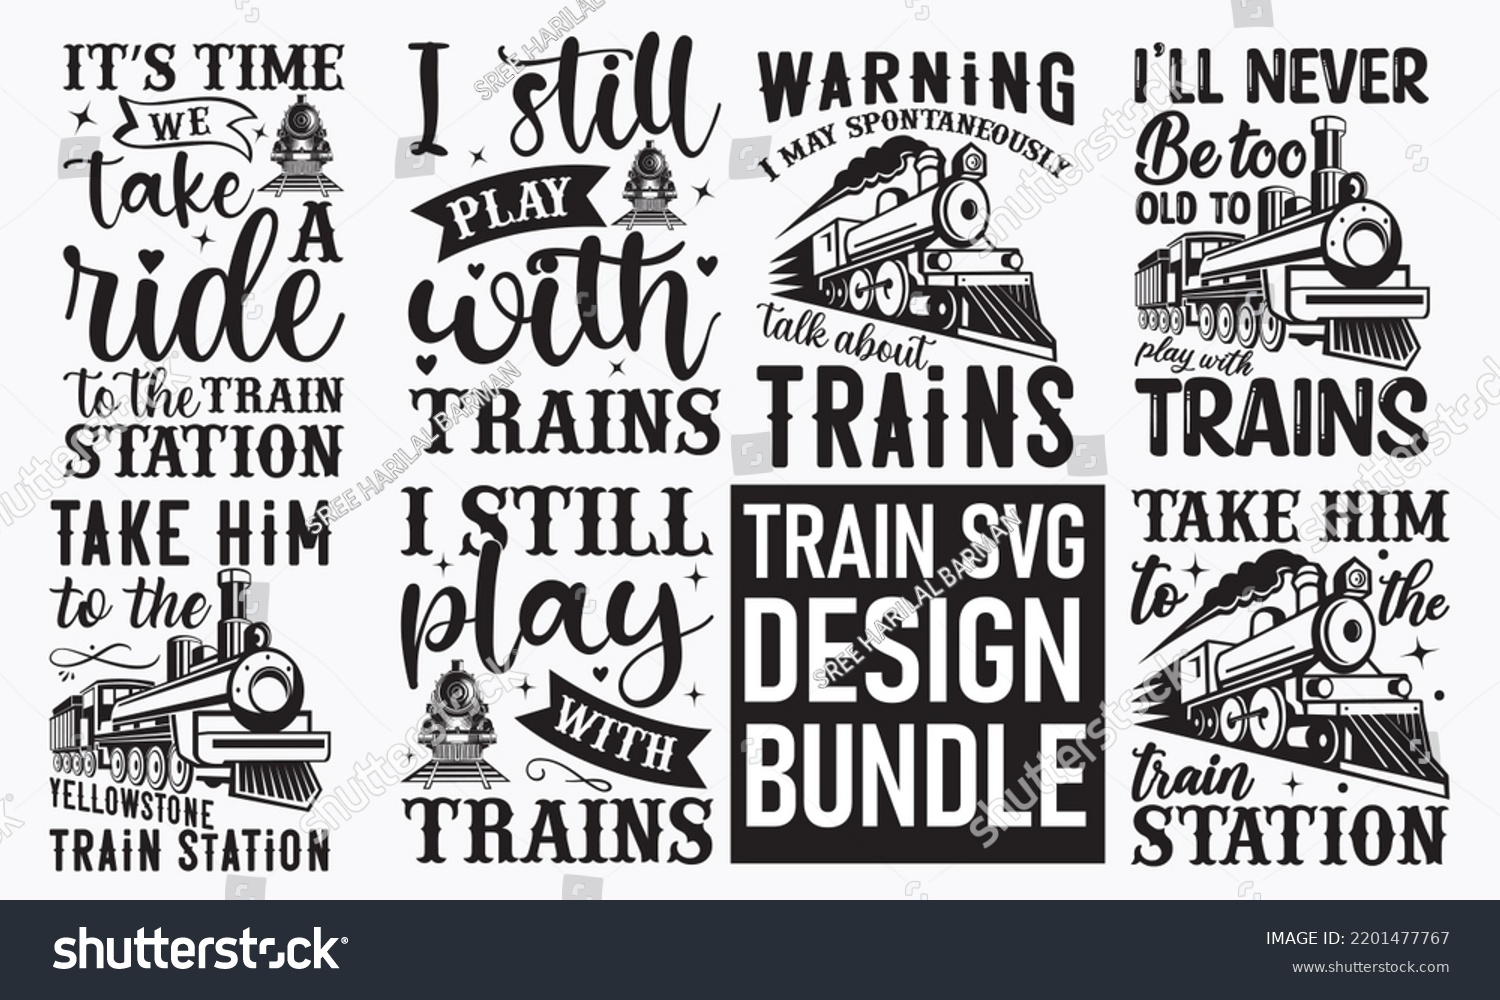 SVG of TRAIN SVG DESIGN BUNDLE - Hand drew lettering phrases, and Calligraphy graphic design,  For stickers, t-shirts, templet, mugs, etc. SVG Files for Cutting Cricut and Silhouette. Eps 10.
 svg